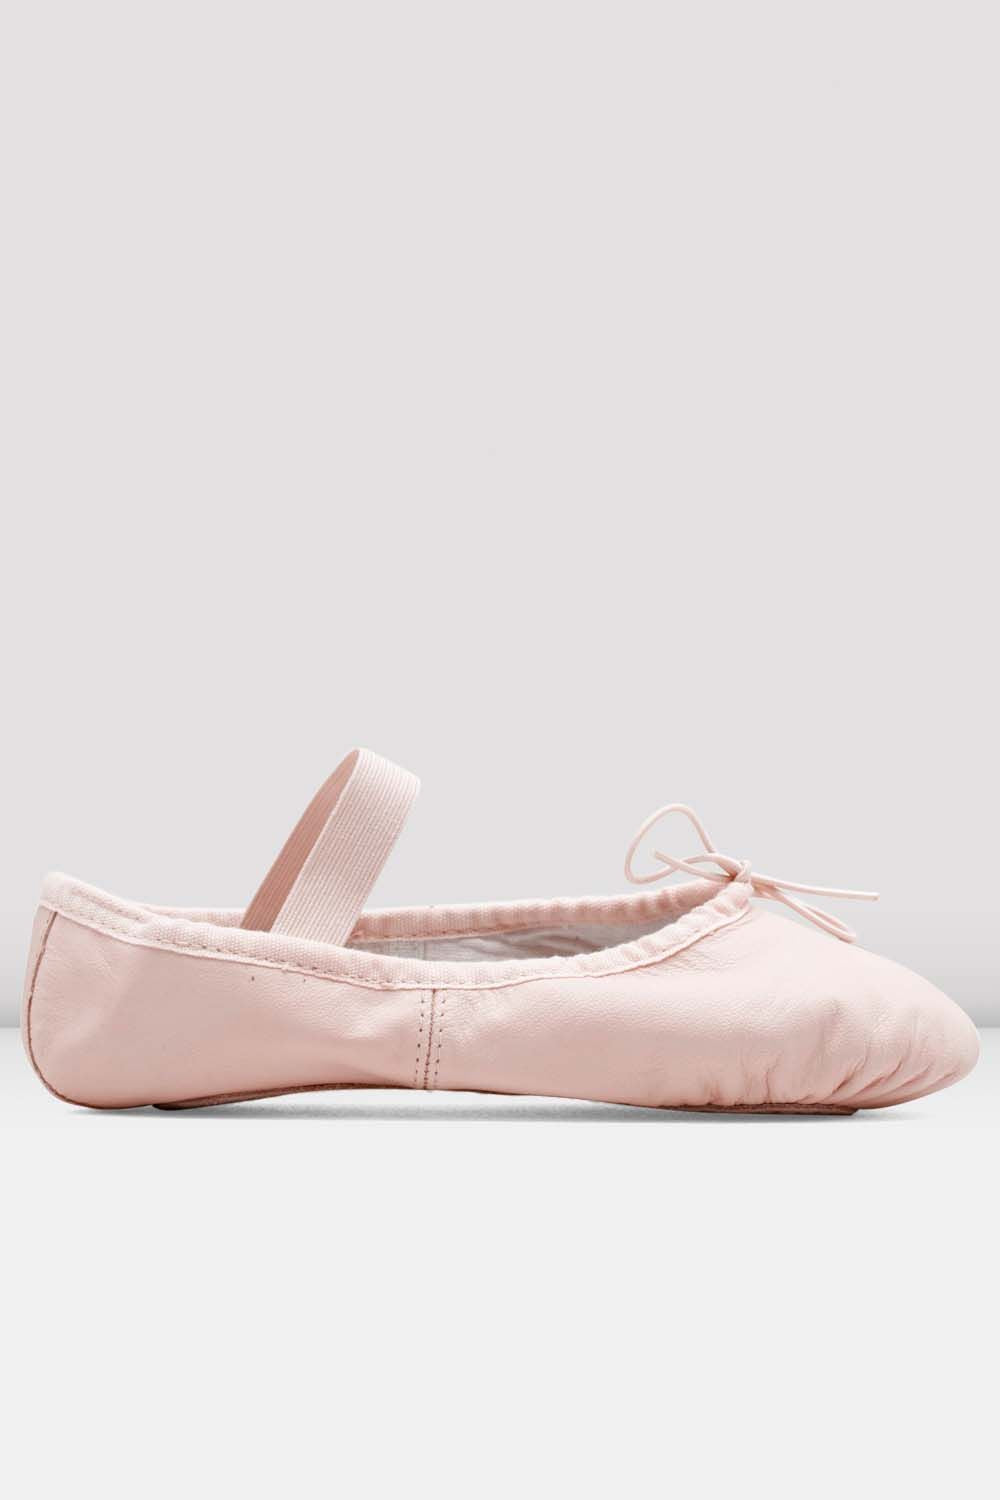 Childrens Dansoft Leather Ballet Shoes, Theatrical Pink – BLOCH Dance US